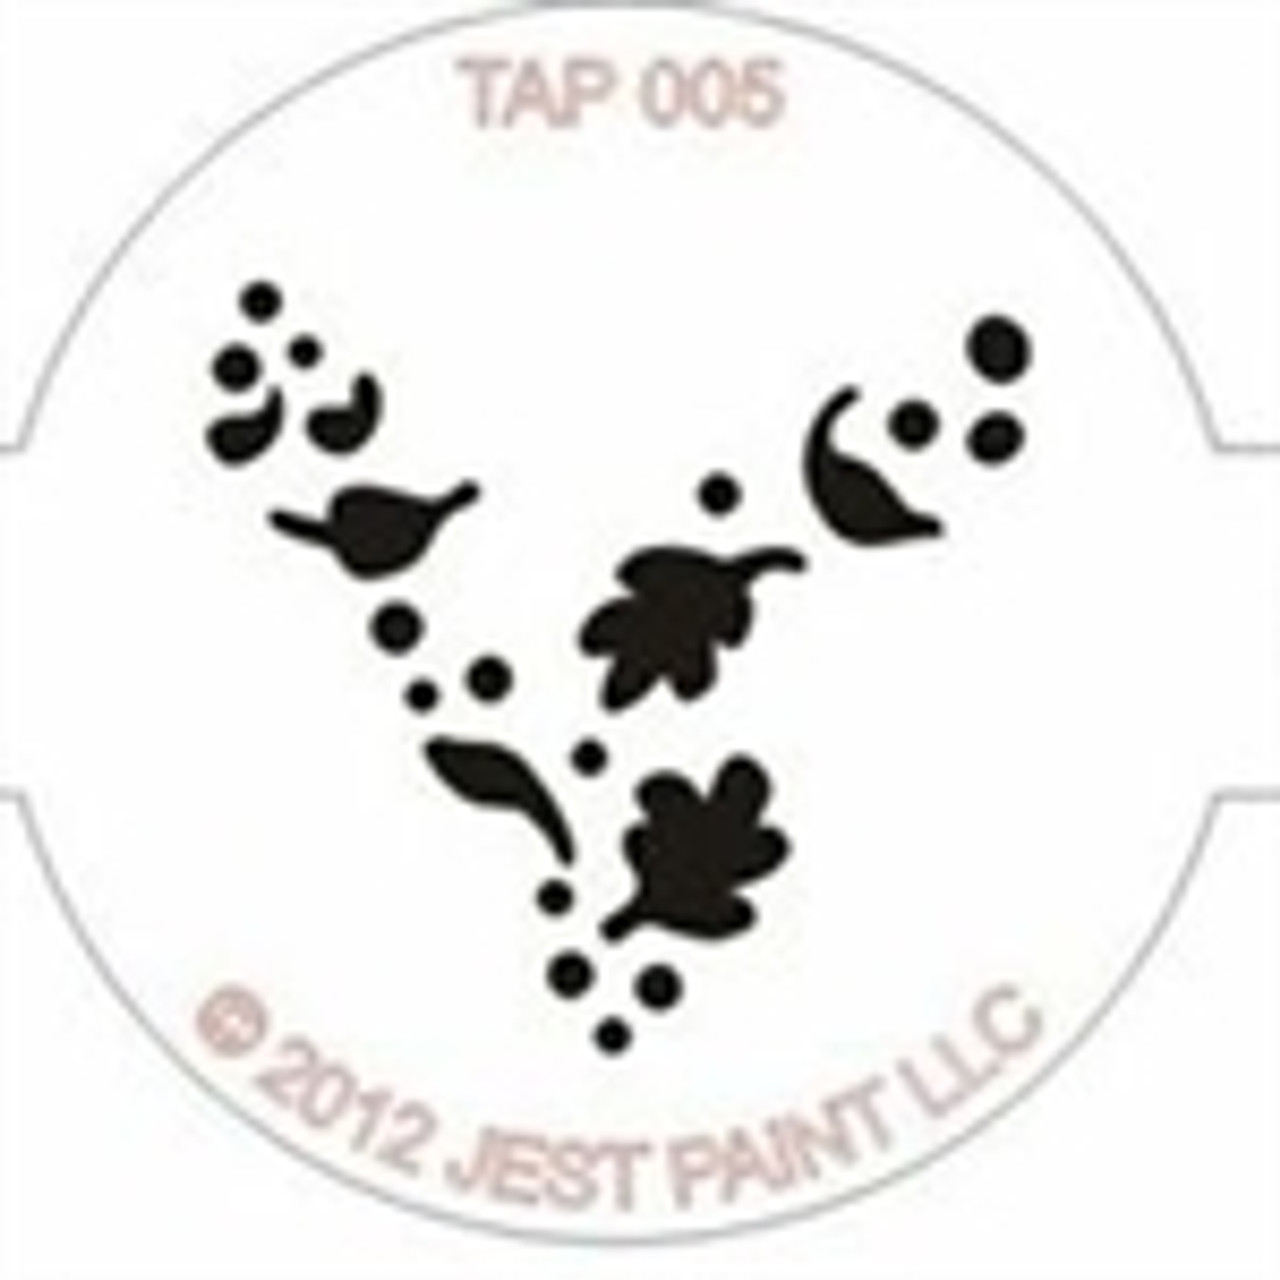 TAP 005 Face Painting Stencil - Wind Dust